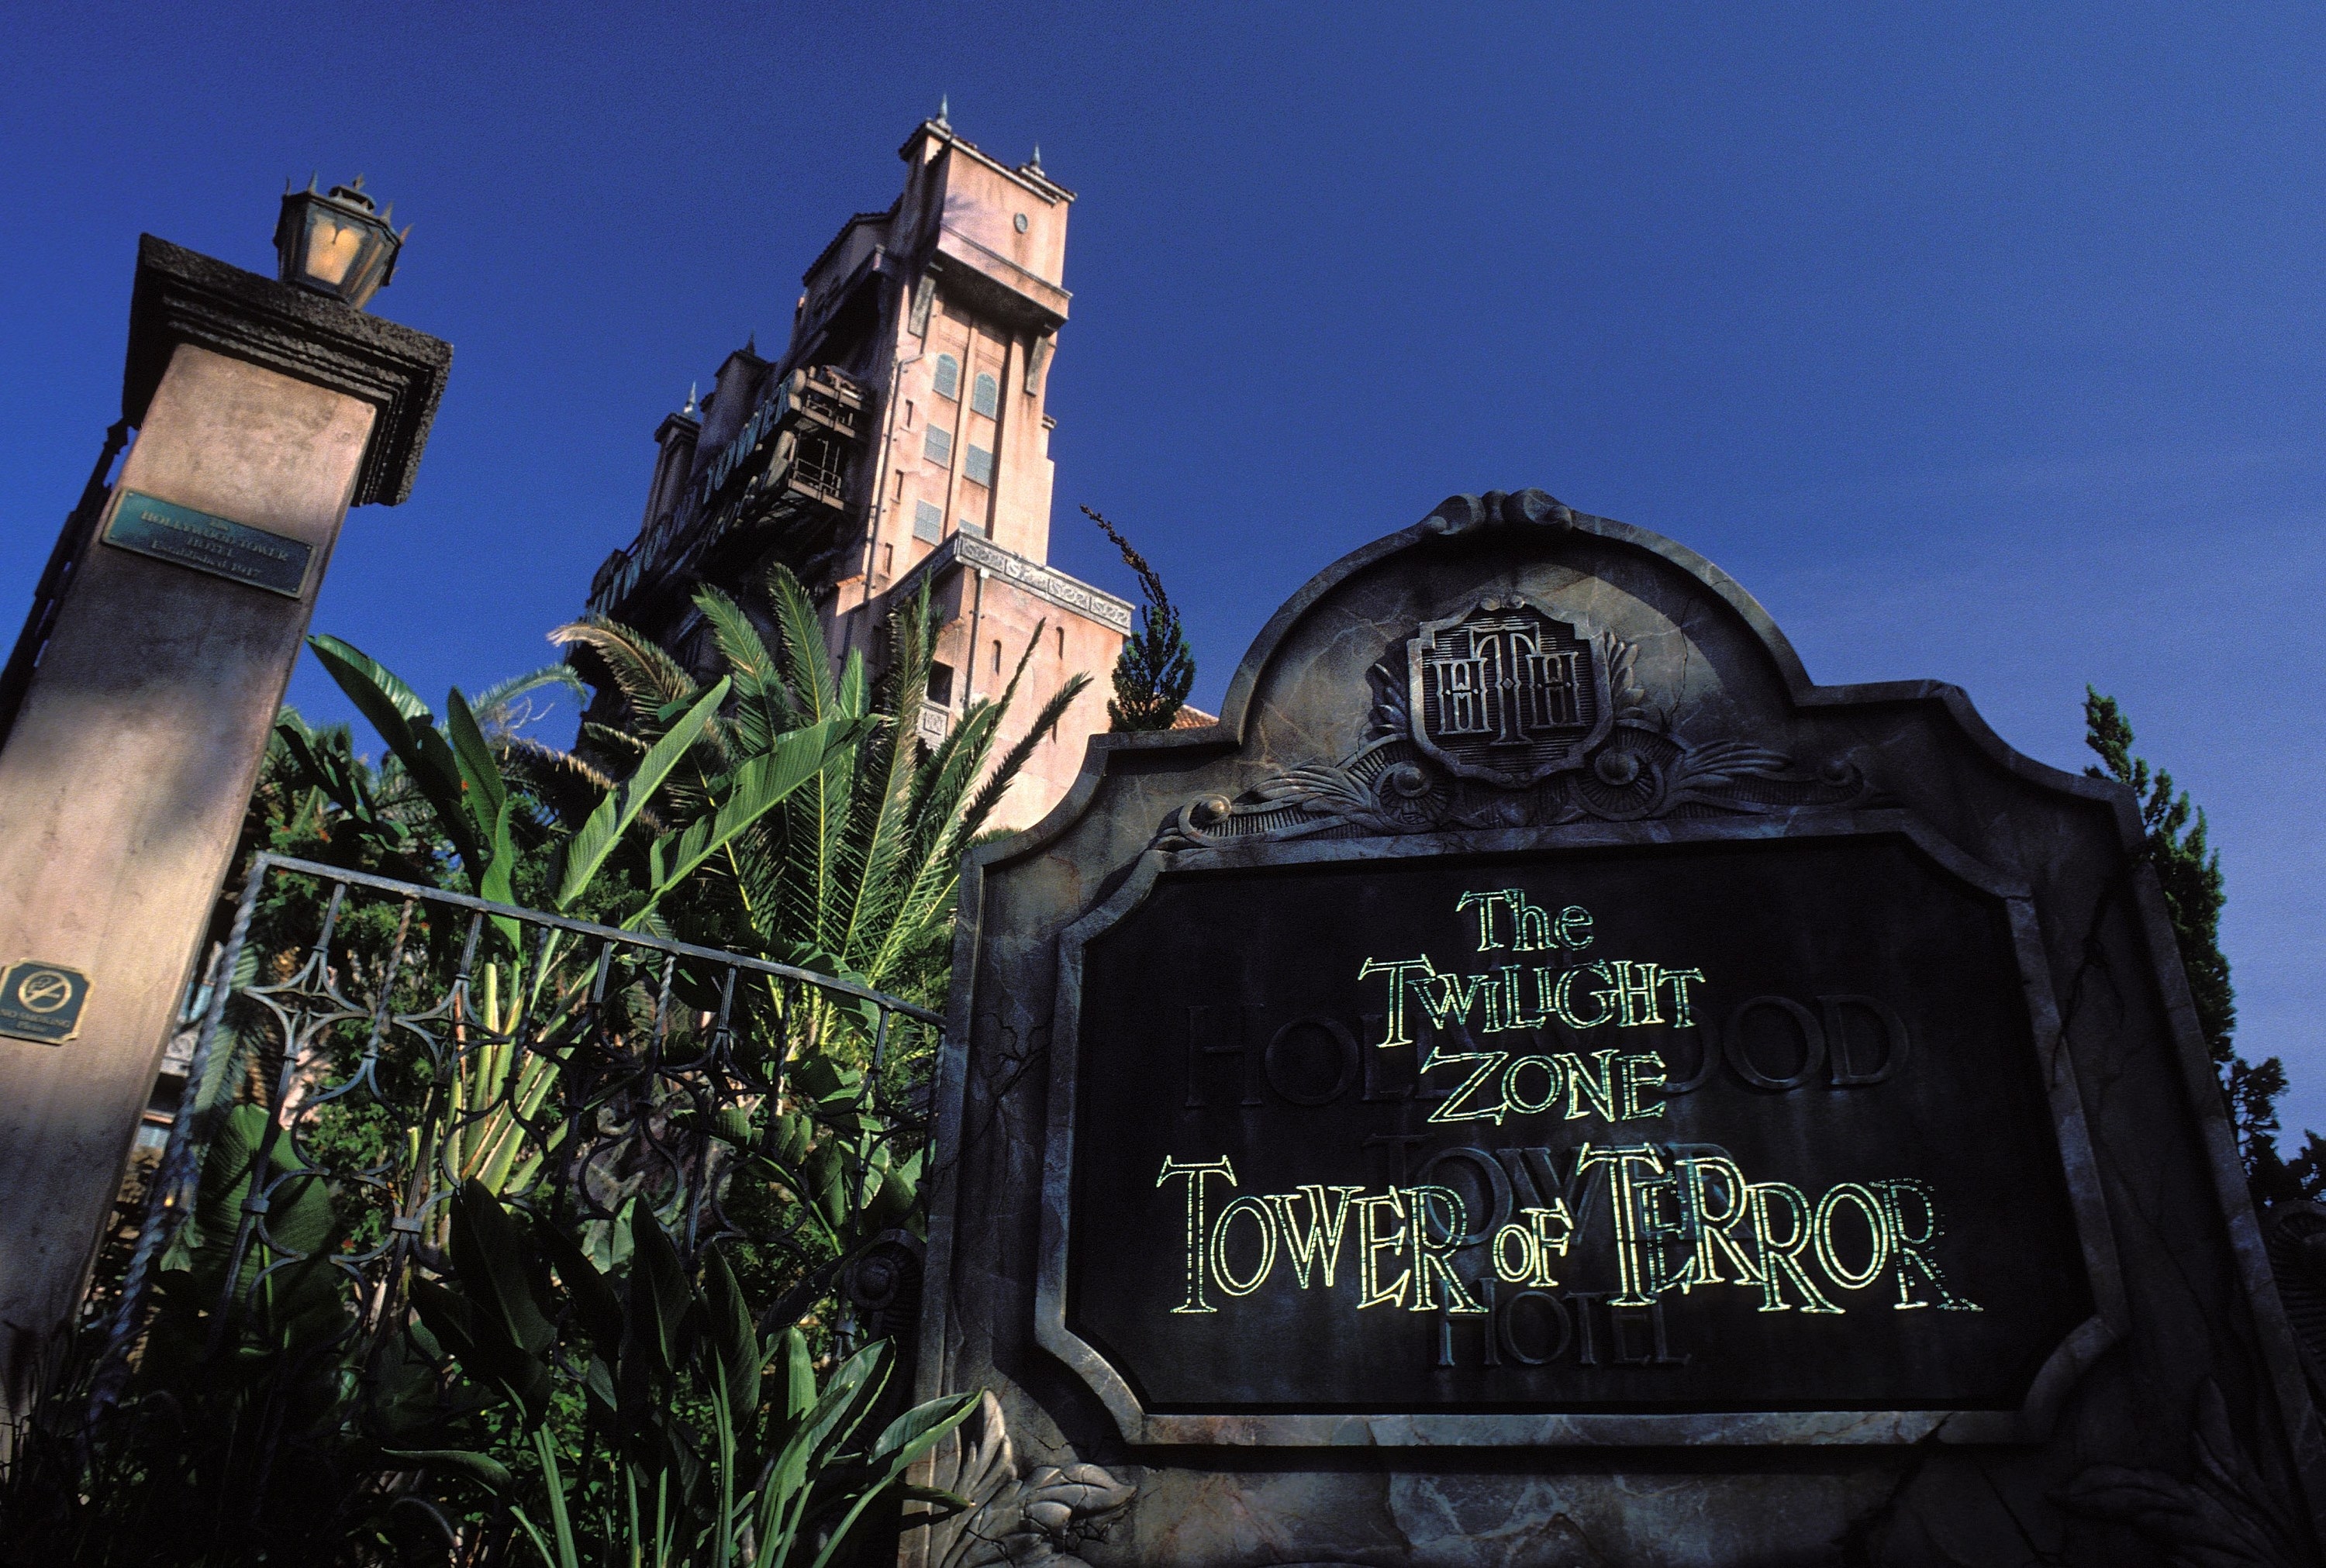 The Twilight Zone Tower of Terror is actually a result of two rides Disney ...